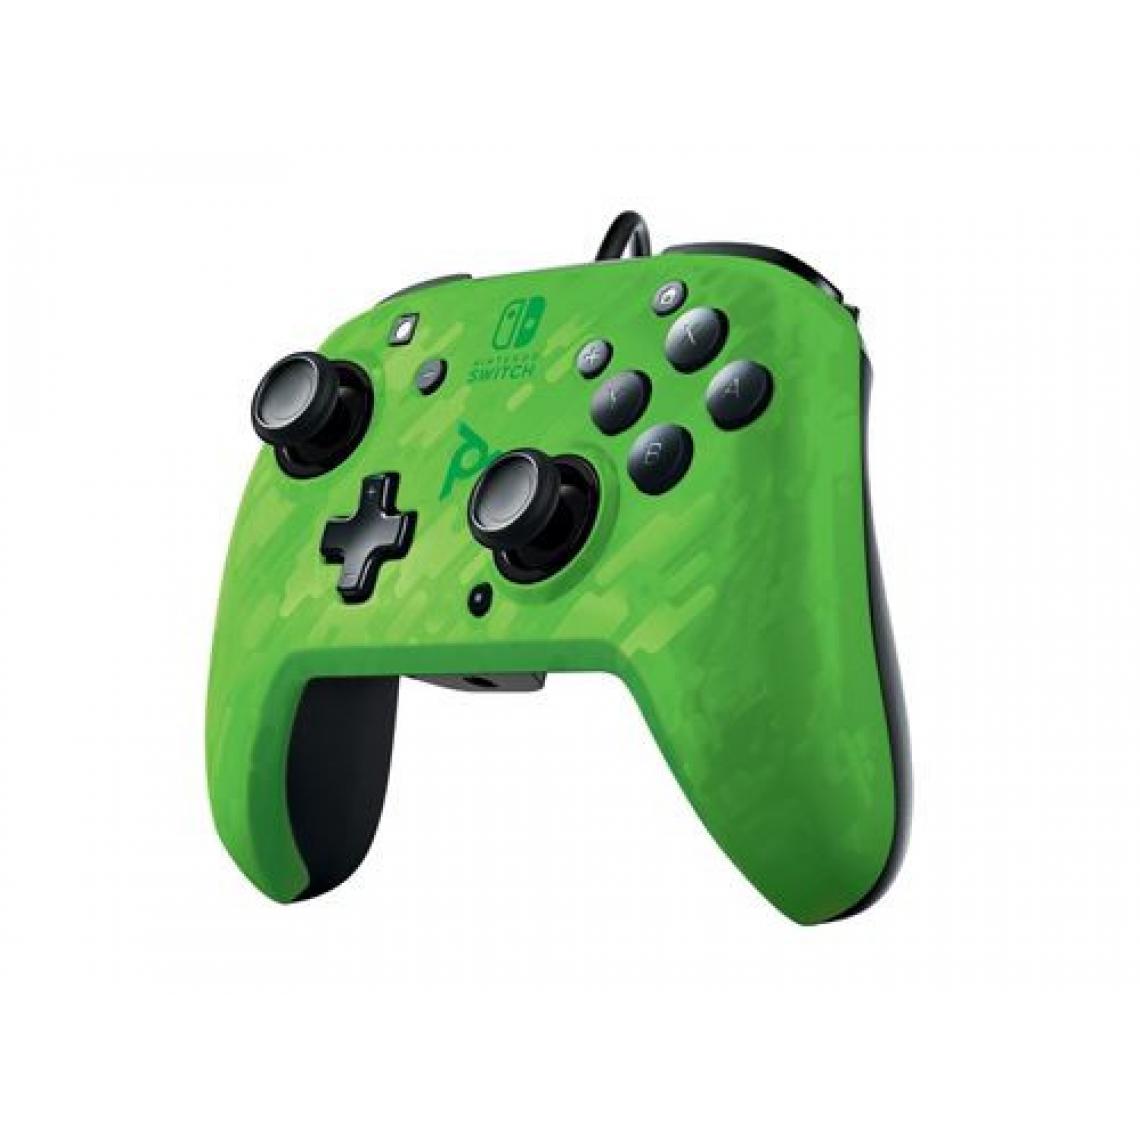 PDP - Manette audio Nintendo Switch Pdp Faceoff Deluxe+ Camouflage Vert - Joystick